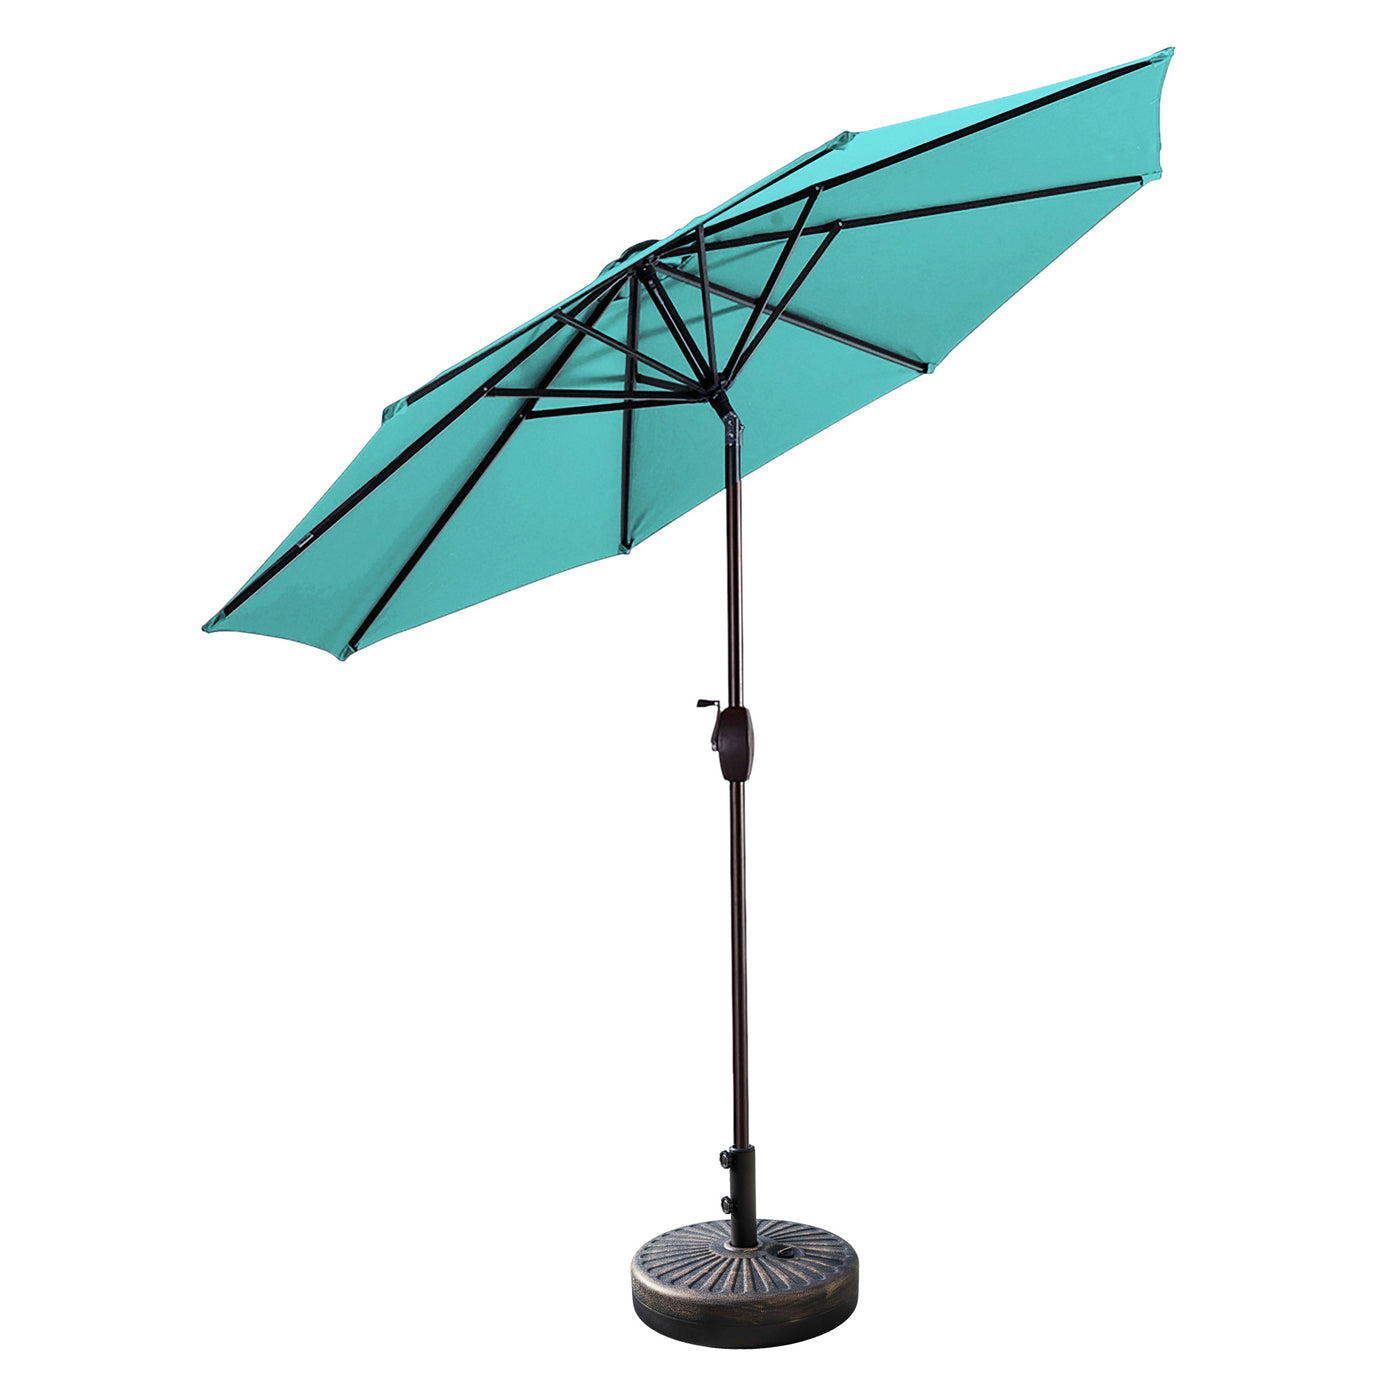 Paolo 9 ft. Patio Umbrella with Bronze Round Weight Base Kit